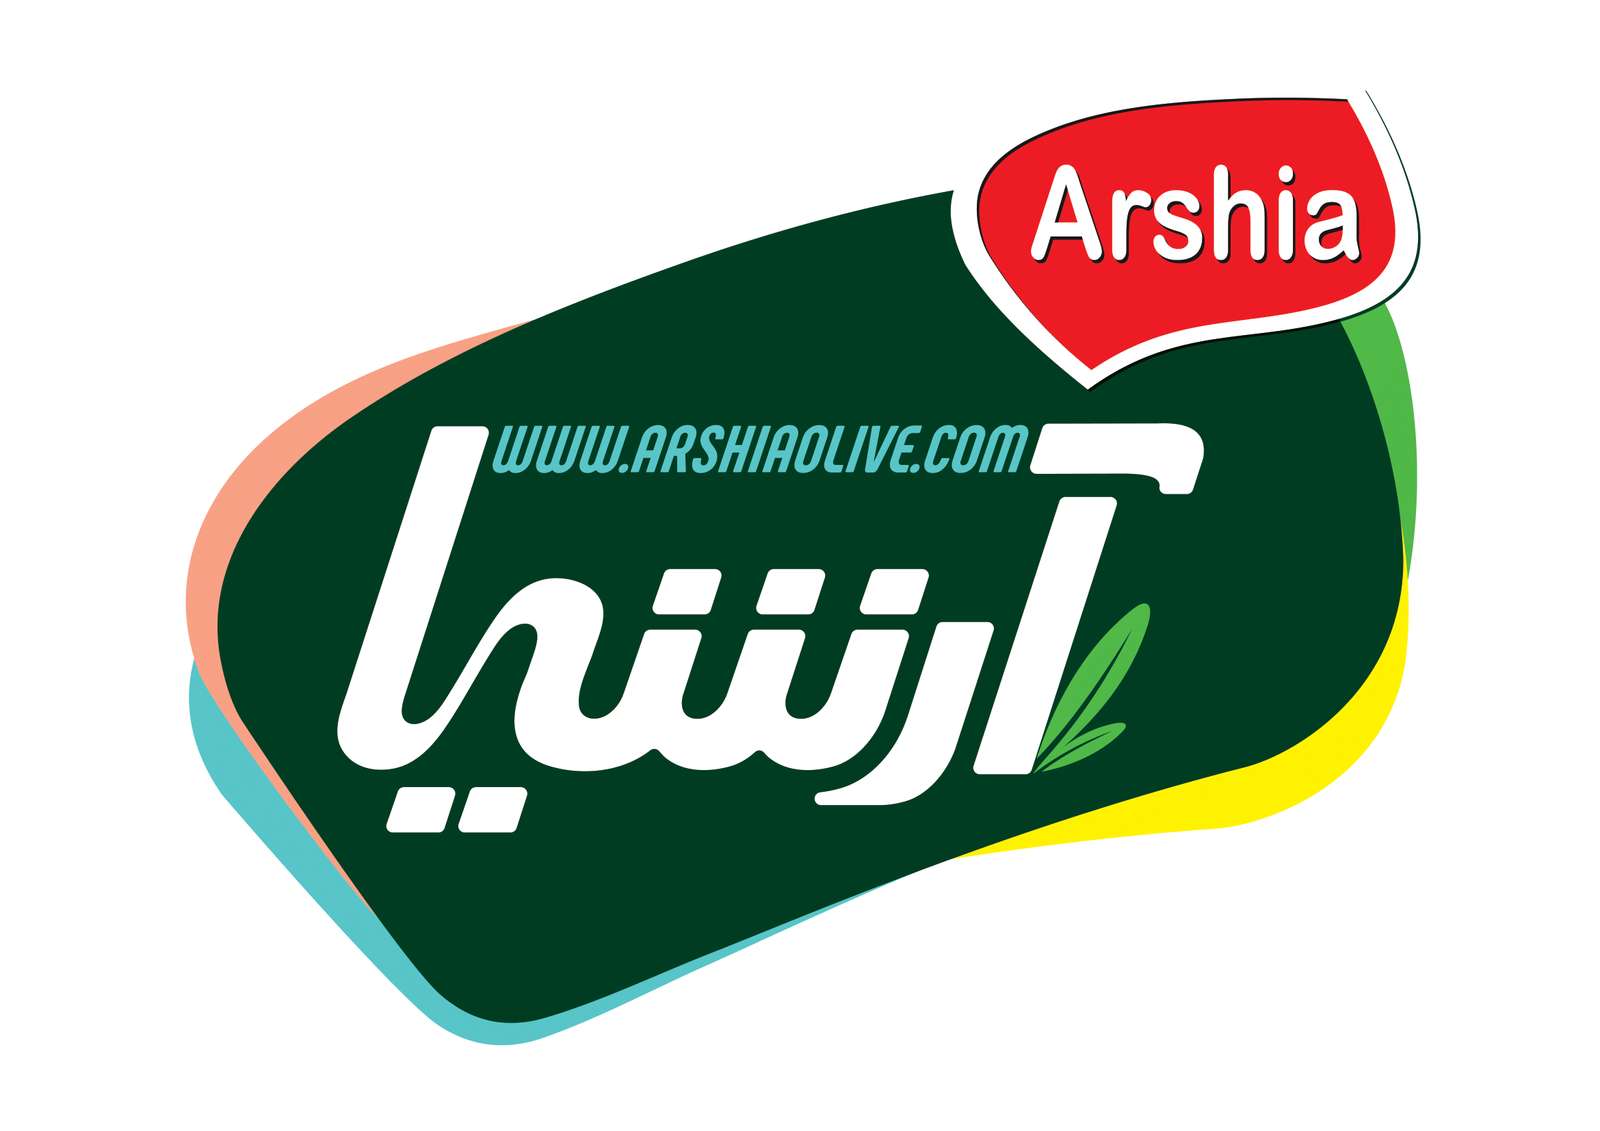 arshiaPuzzle puzzle online from photo